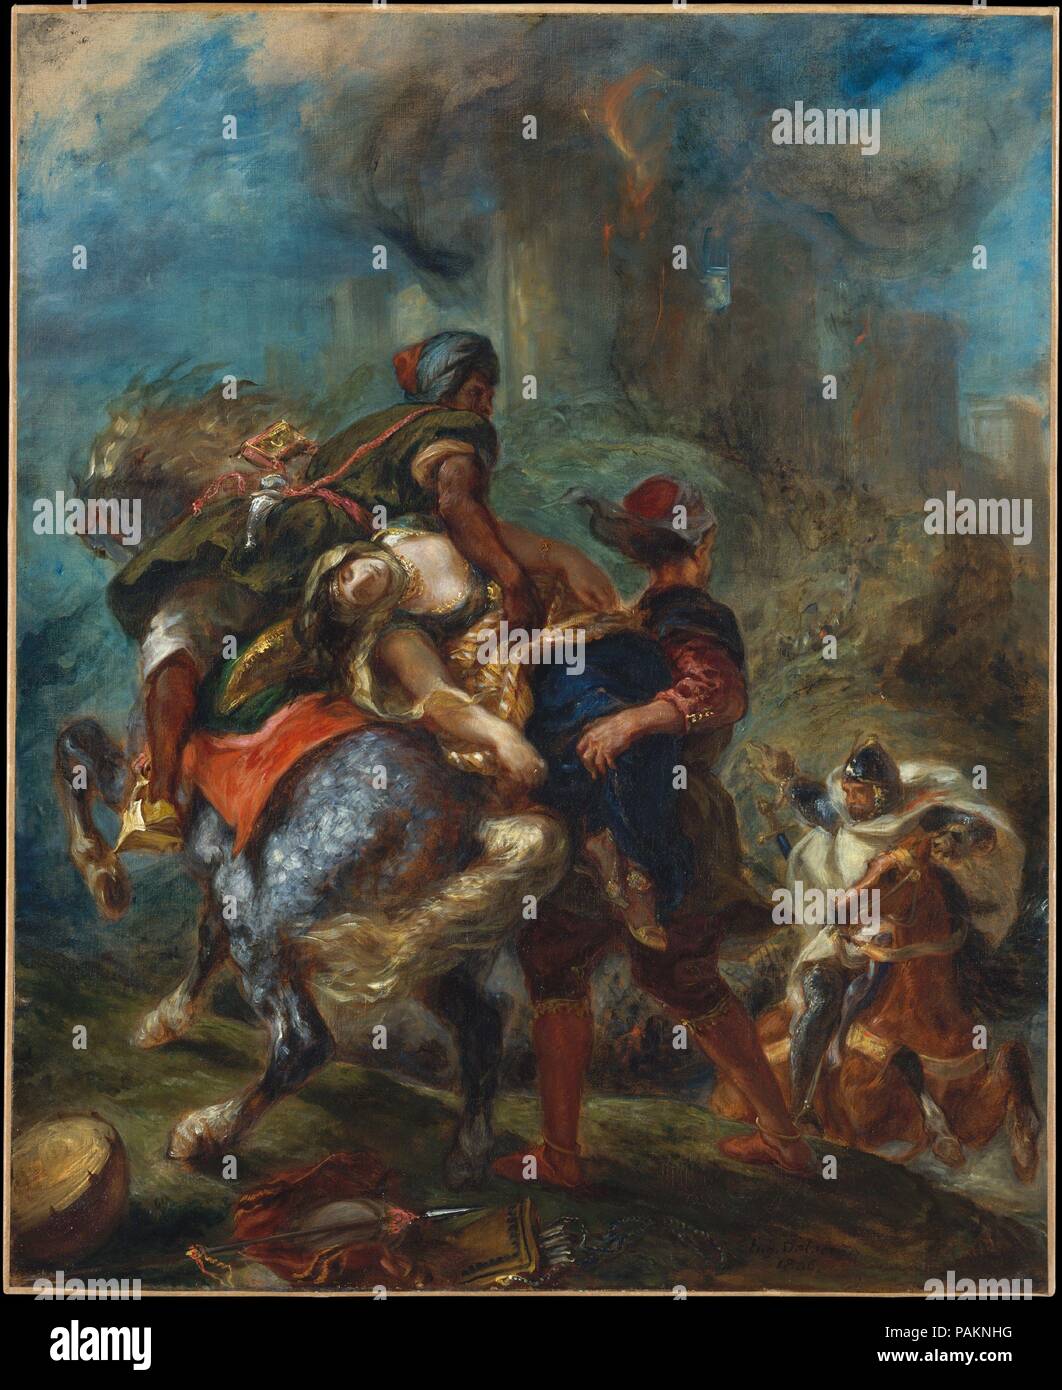 The Abduction of Rebecca. Artist: Eugène Delacroix (French, Charenton-Saint-Maurice 1798-1863 Paris). Dimensions: 39 1/2 x 32 1/4 in. (100.3 x 81.9 cm). Date: 1846.  Throughout his career, Delacroix was inspired by the novels of Sir Walter Scott, a favorite author of the French Romantics. This painting depicts a scene from <i>Ivanhoe</i>: the Jewish heroine Rebecca, who had been confined in the castle of Front de Boeuf (seen in flames), is carried off by two Saracen slaves commanded by the covetous Christian knight Bois-Guilbert. The contorted, interlocking poses and compacted space, which shi Stock Photo